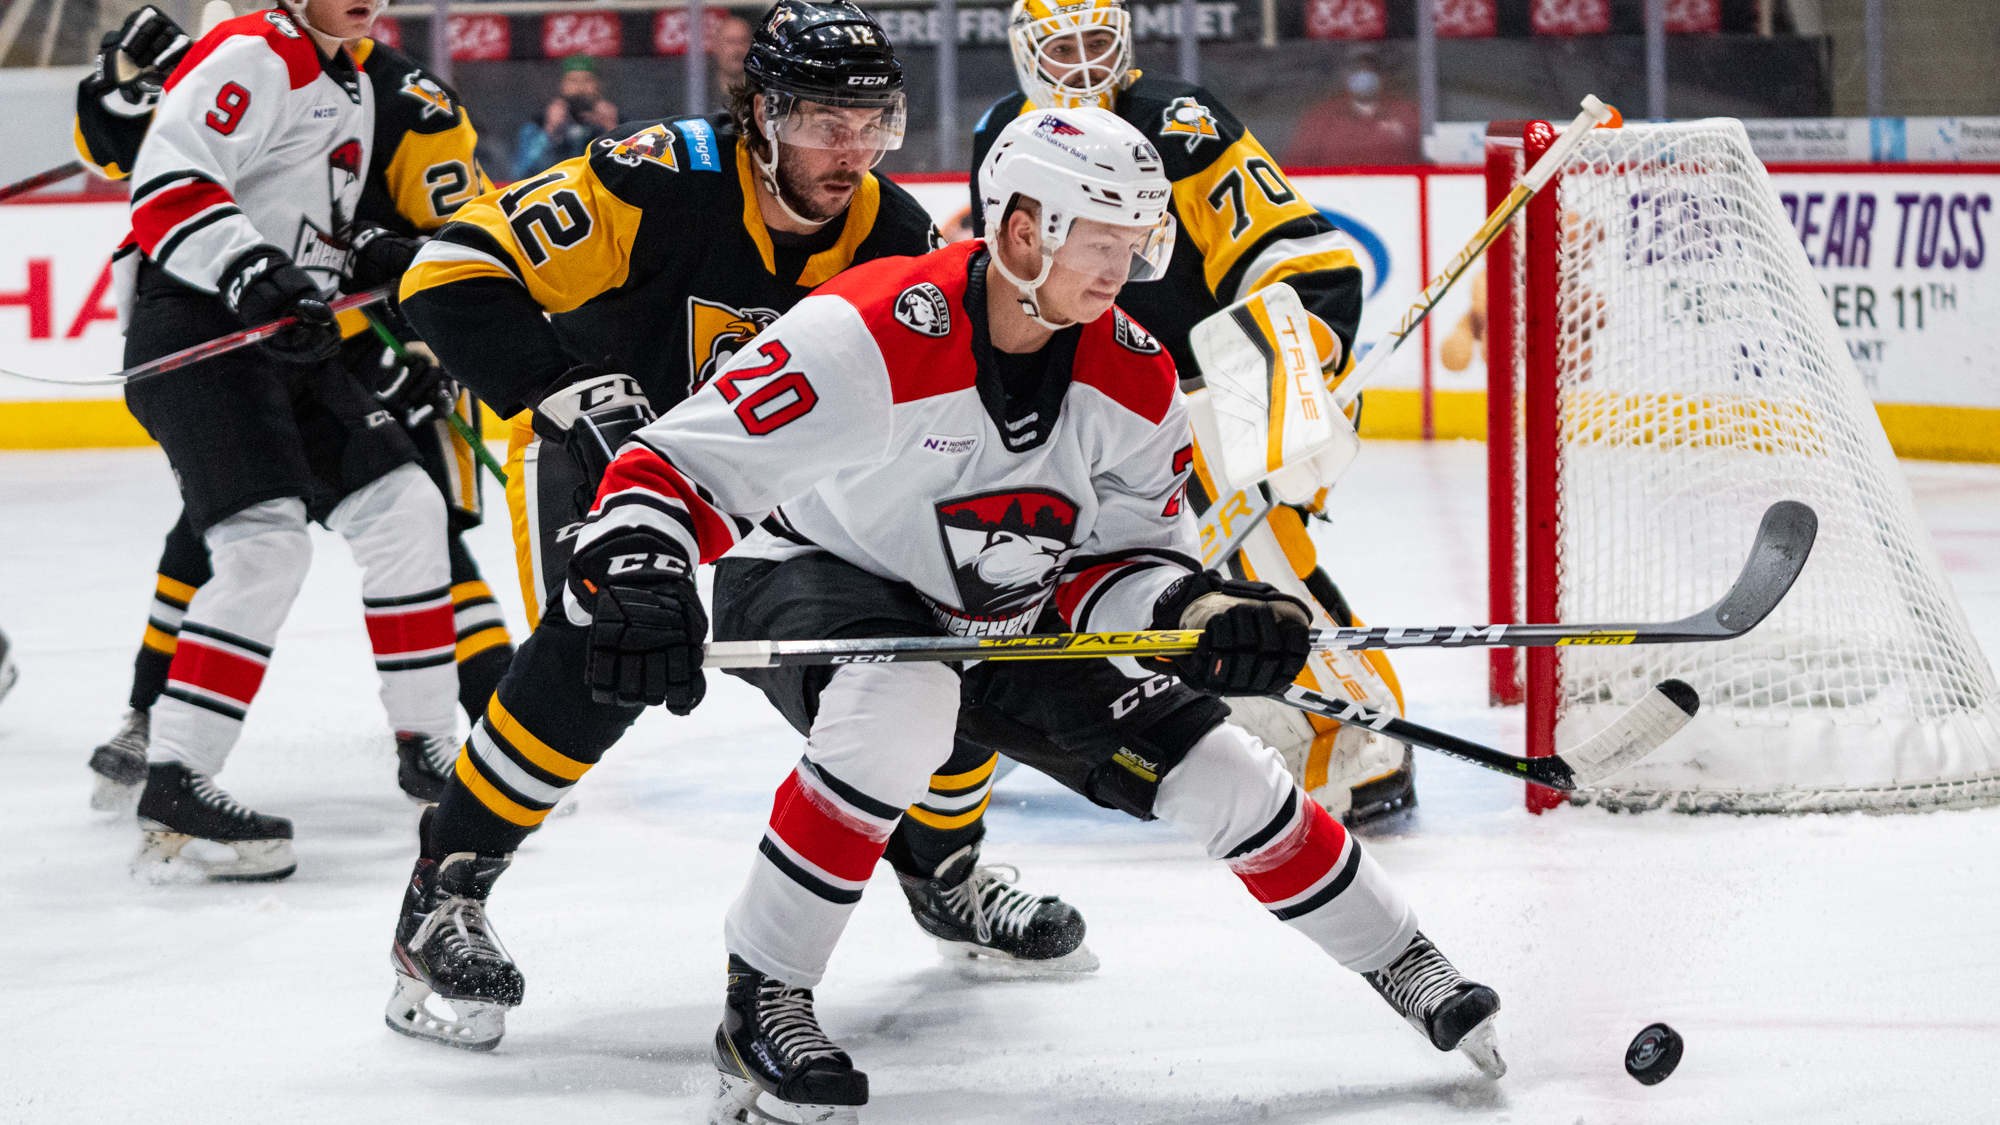 PENGUINS LOSE REMATCH TO CHECKERS, 4-1